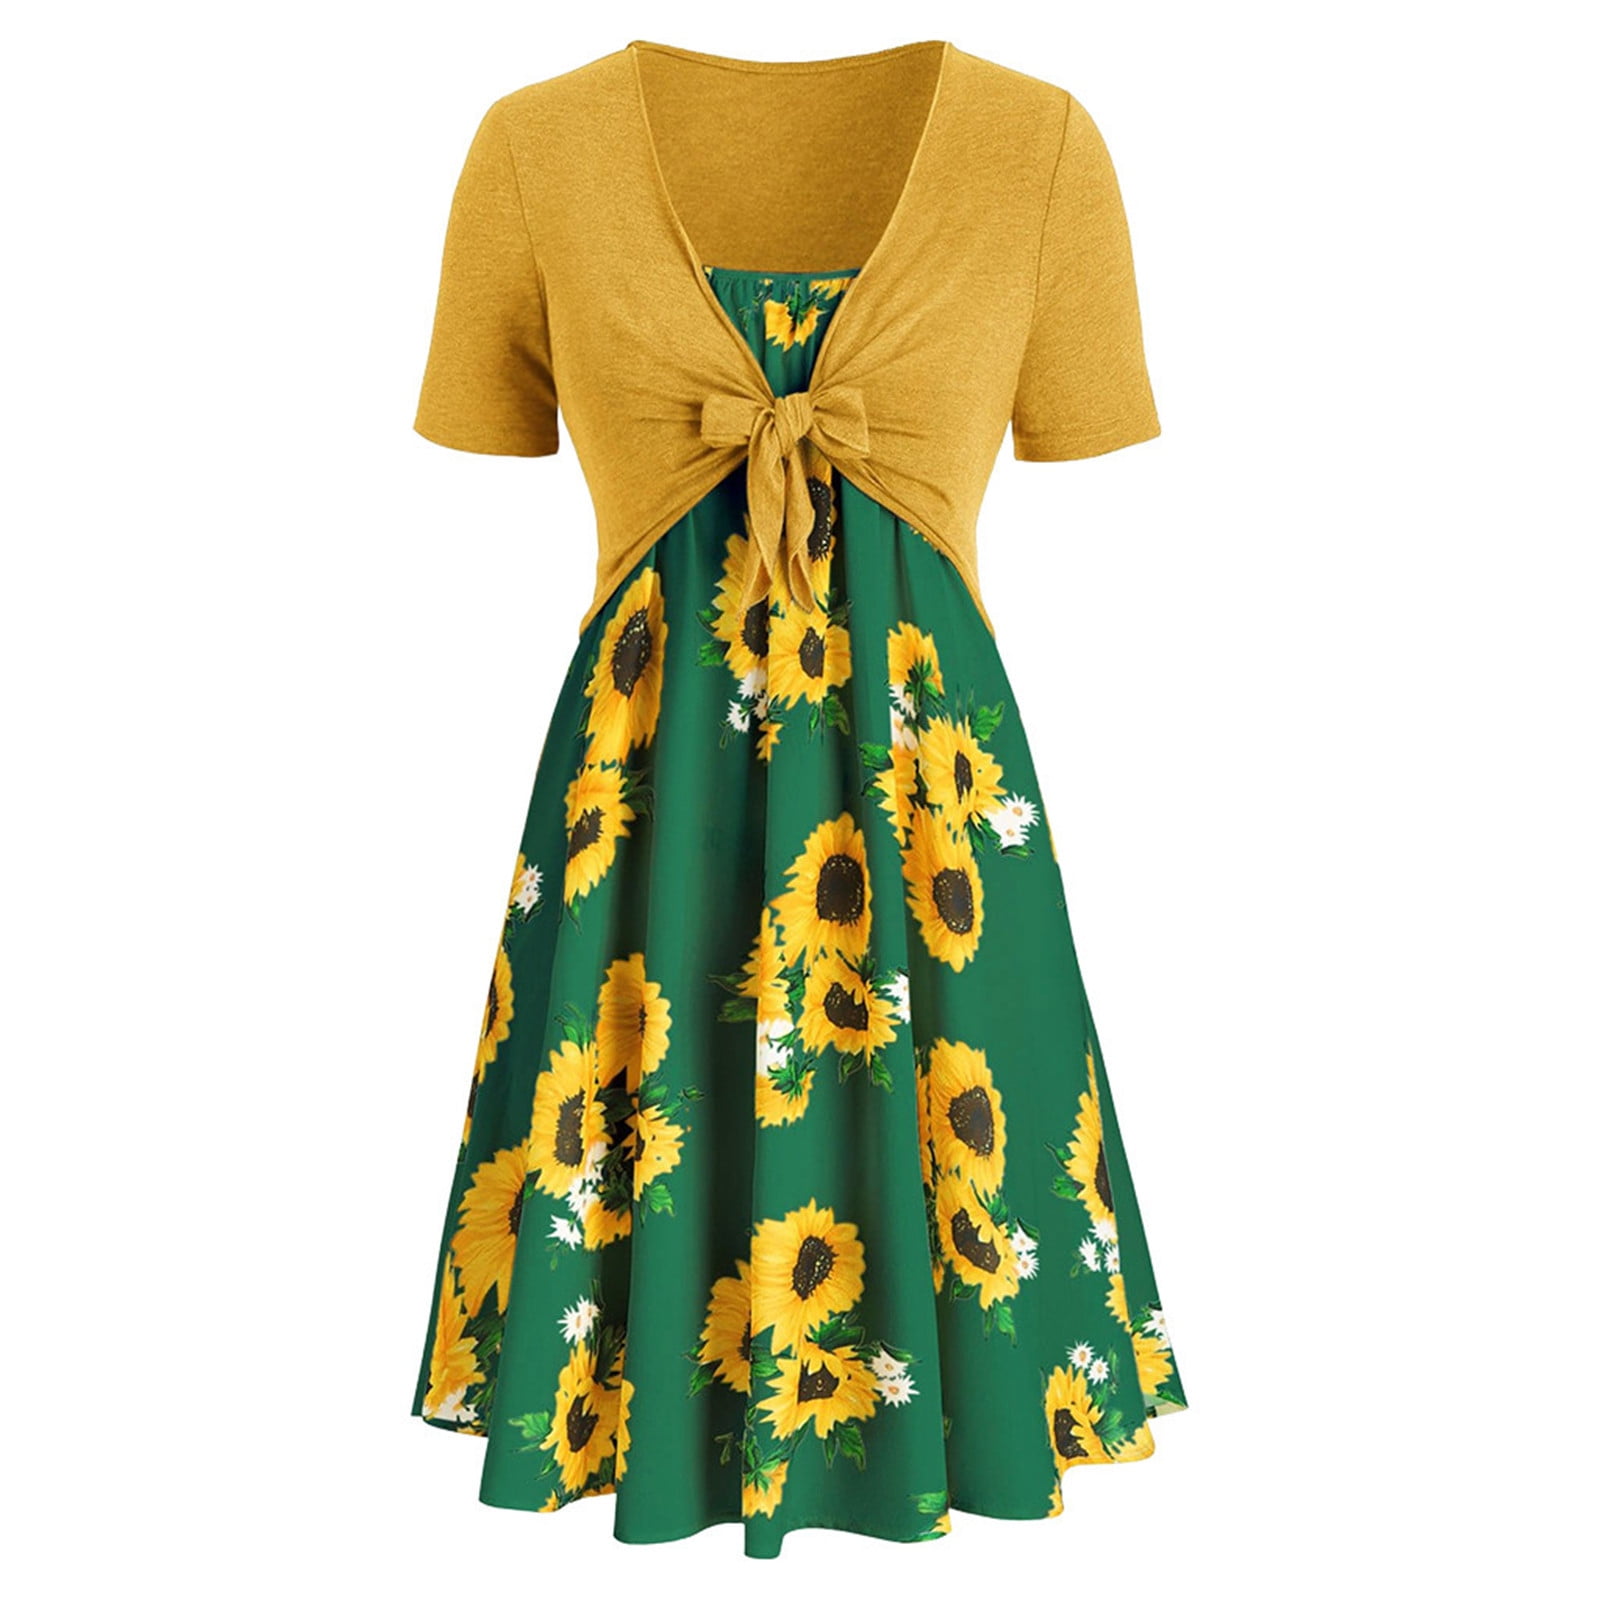 Womens Sunflower Short Sleeve Midi Dresses Bow Knot Bandage Tops Suit Summer Casual Straps Cover Up Mini Tshirt Dress Loose Swing Flowy Pleated Floral Sun Dress 